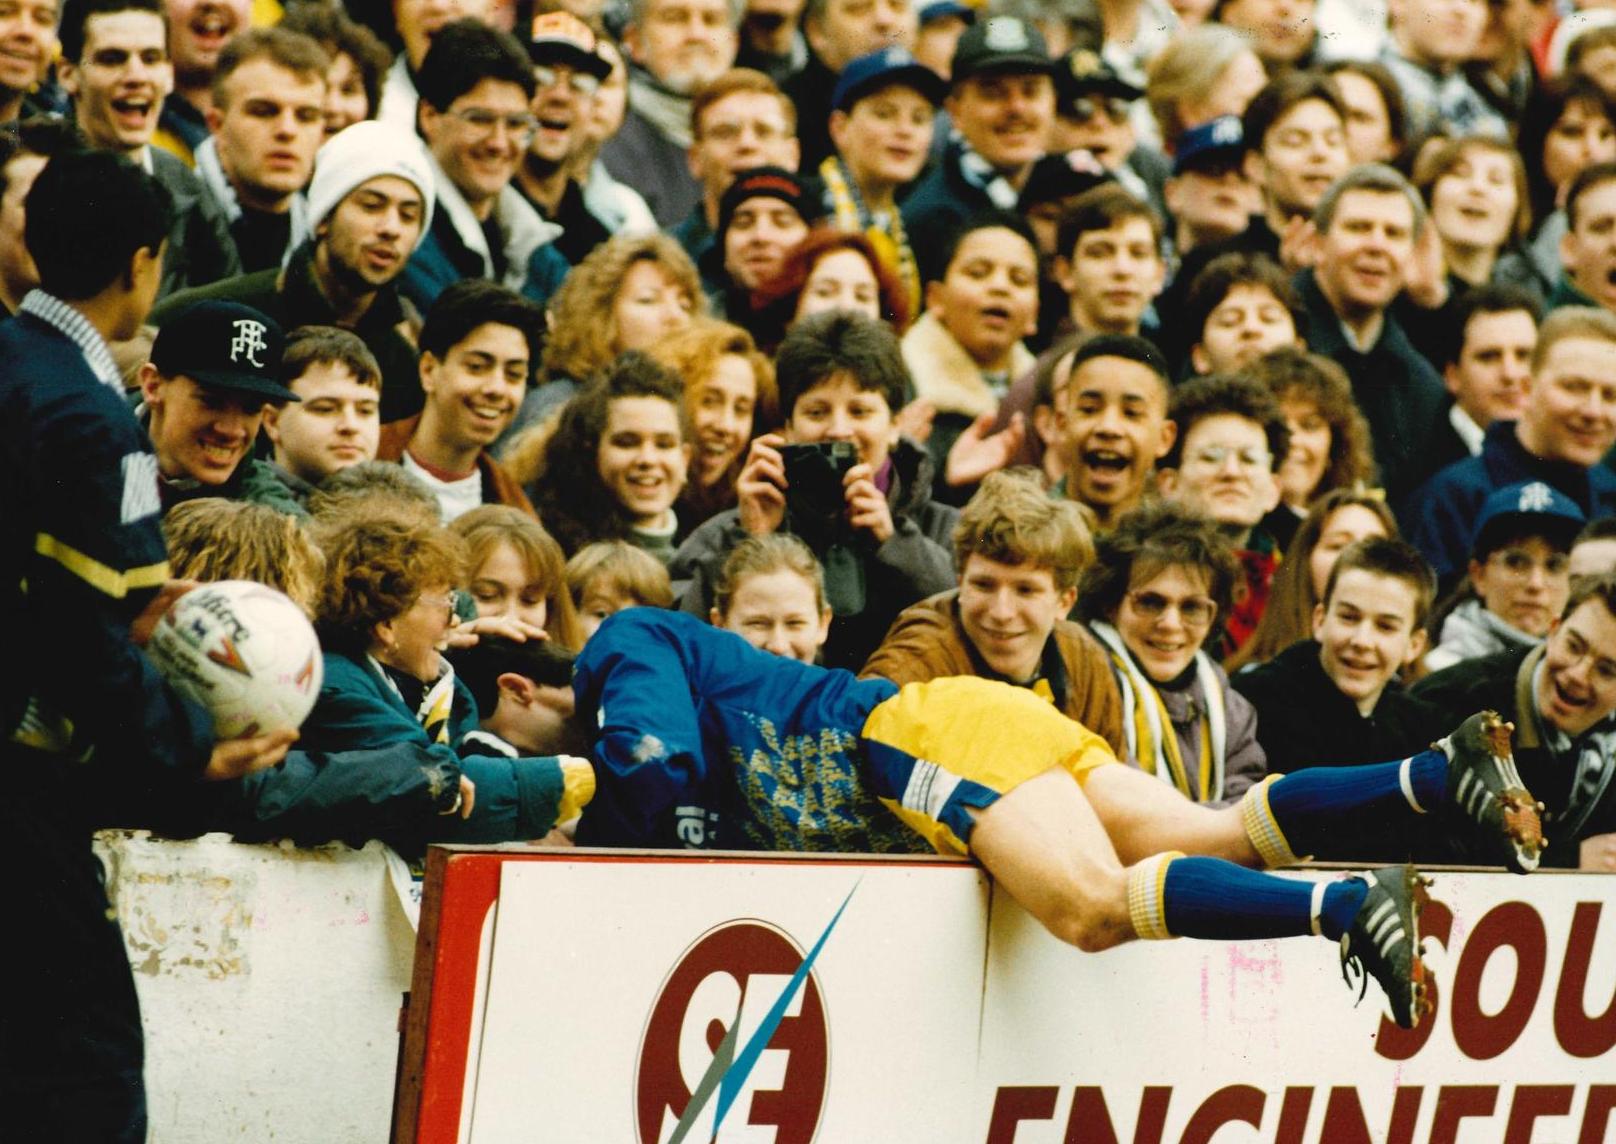 It wasn't Leeds United or Steve Hodge's afternoon at White Hart Lane.